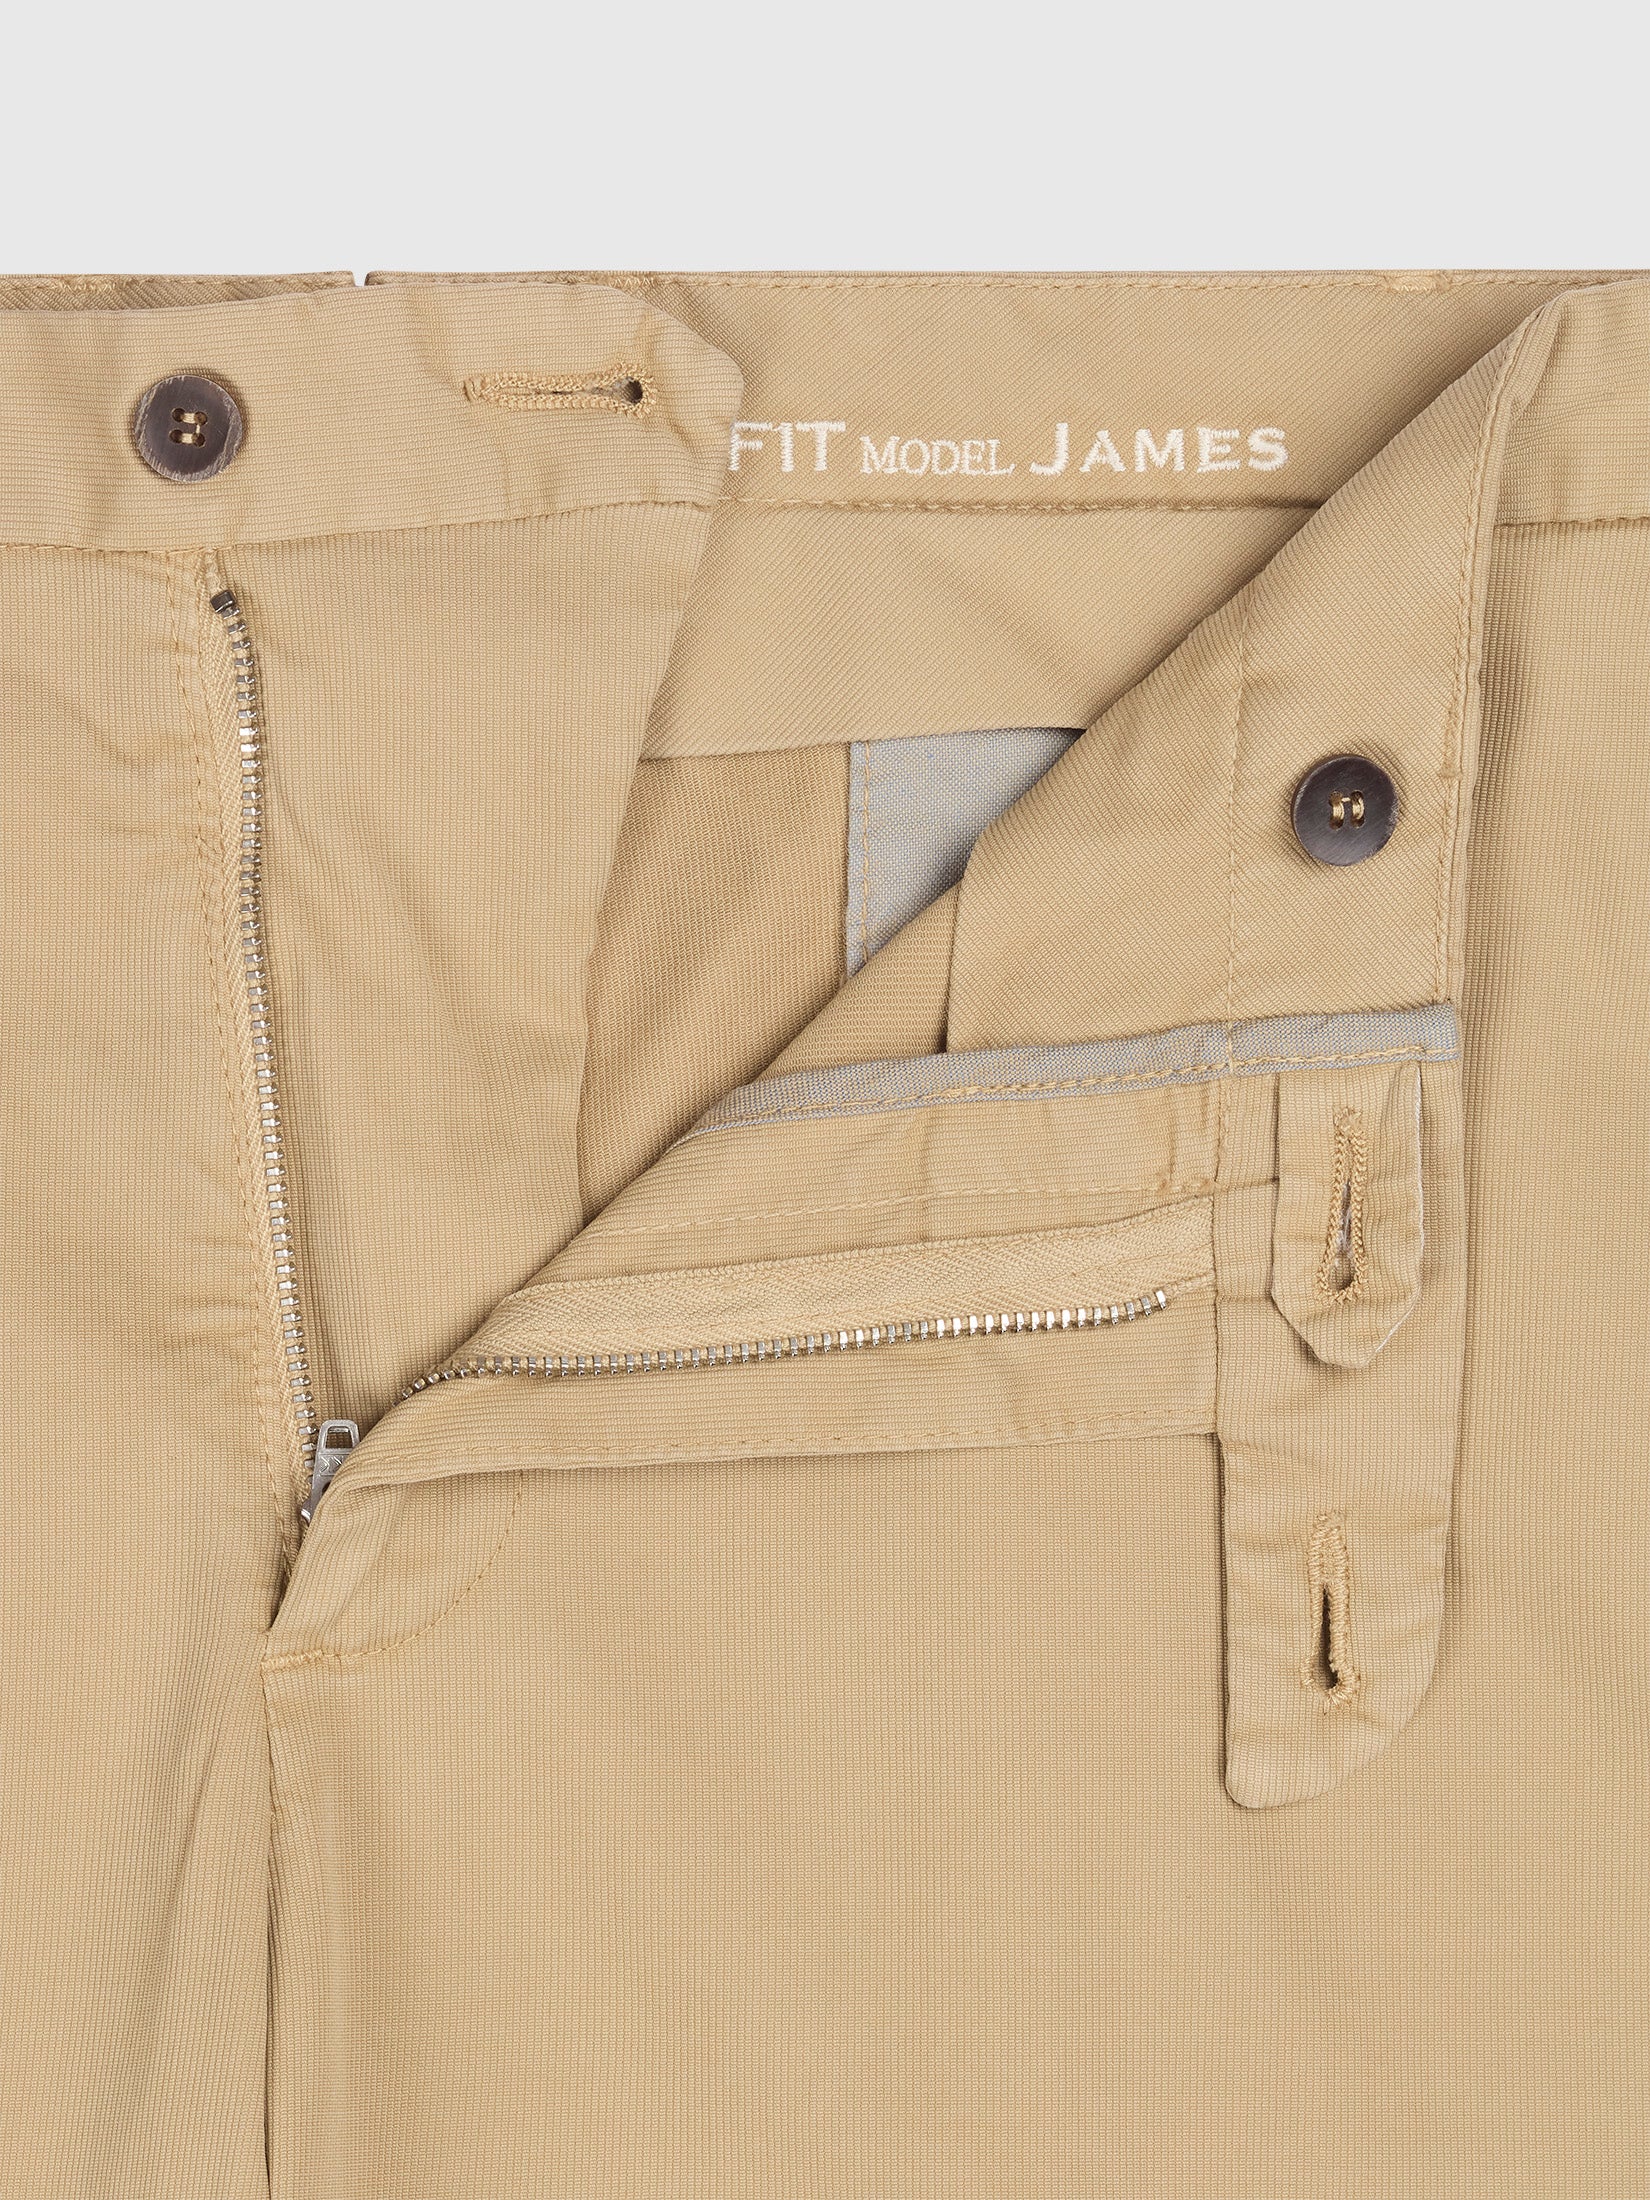 Beige Cannetté Stretchy Chino